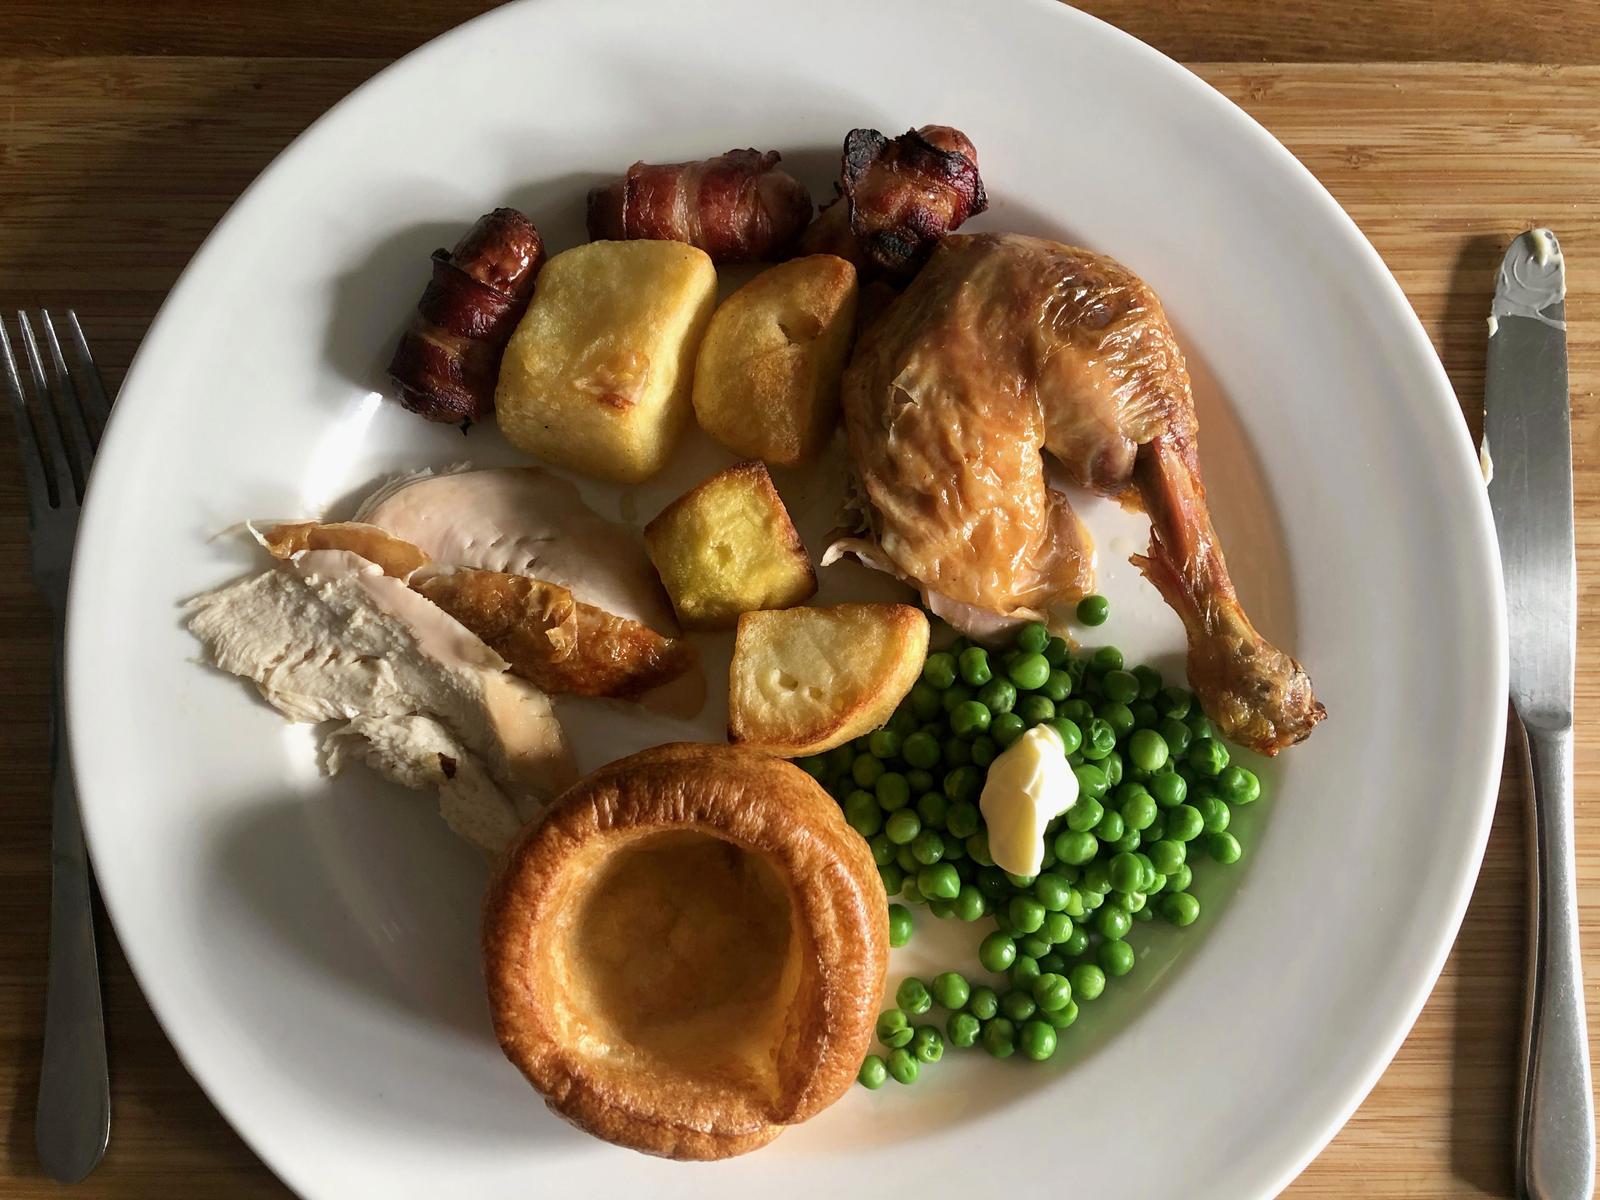 It’s Time to Find Out What Your 🥳 Holiday Vibe Is With the 🎄 Christmas Feast You Plan Yorkshire pudding